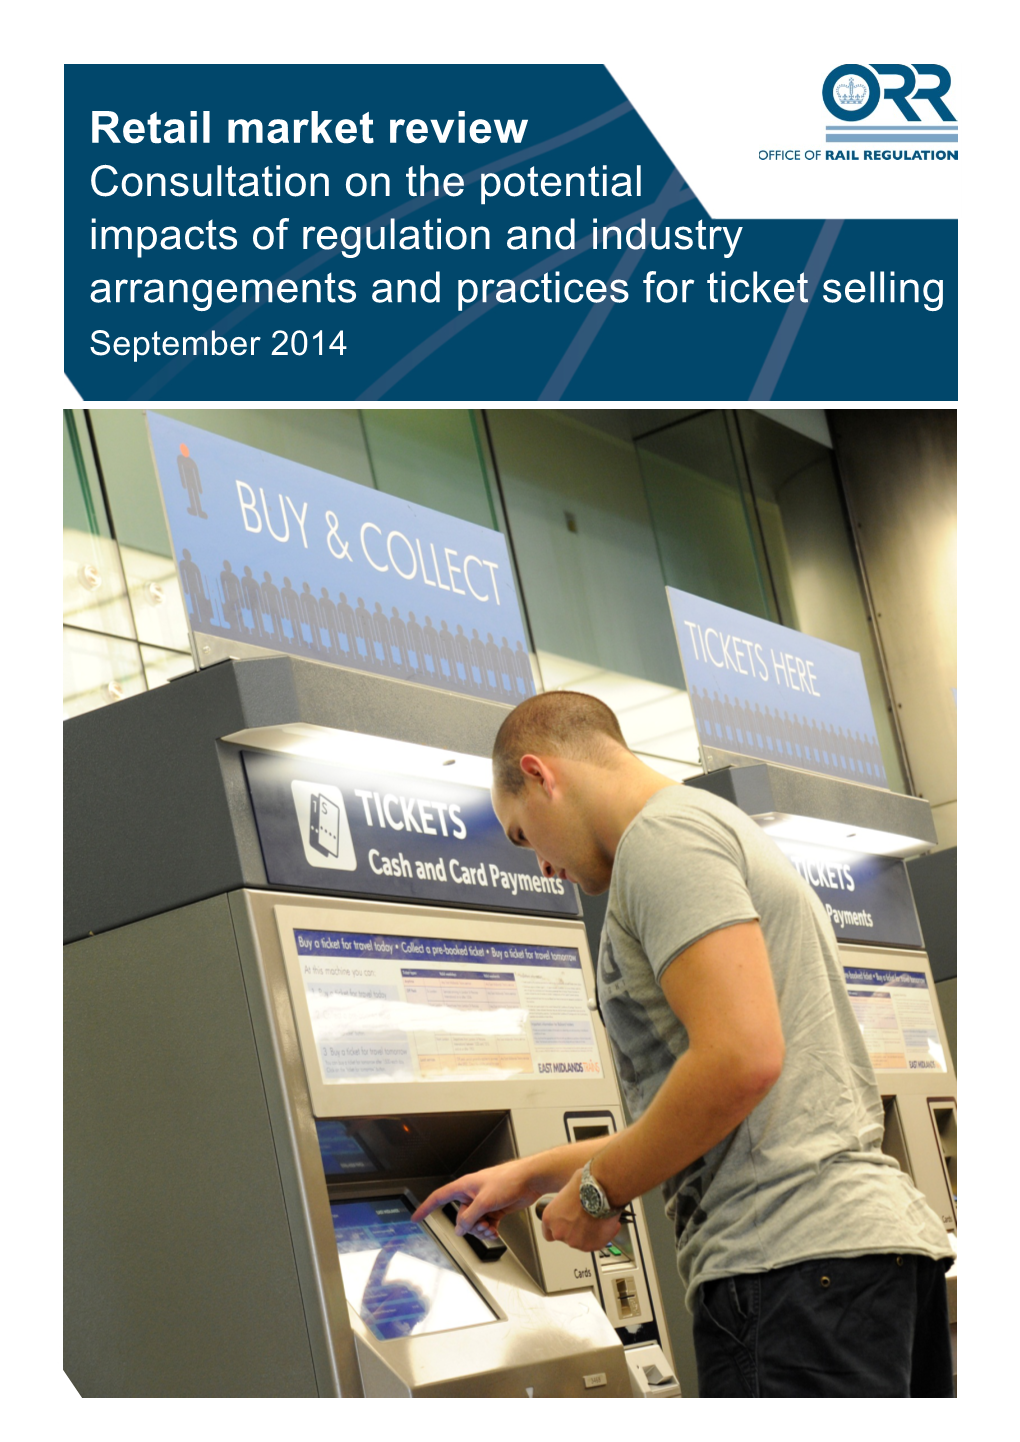 Retail Market Review Consultation on the Potential Impacts of Regulation and Industry Arrangements and Practices for Ticket Selling